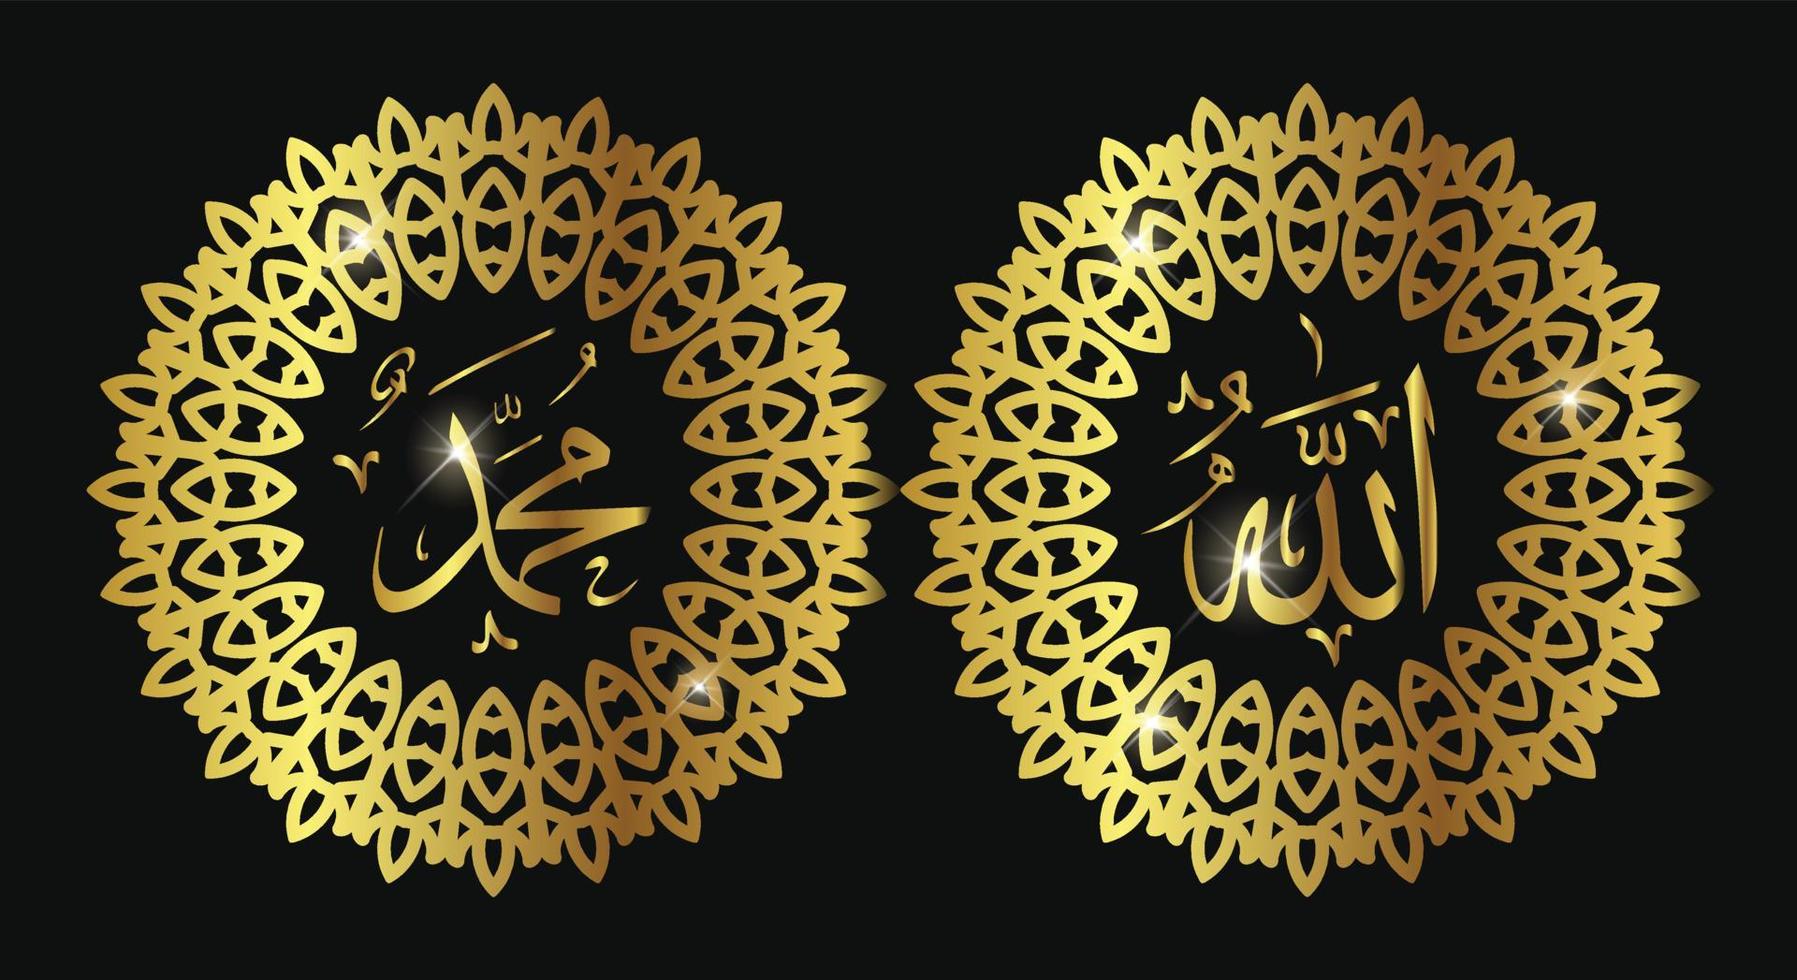 Allah muhammad Name of Allah muhammad, Allah muhammad Arabic islamic calligraphy art, with traditional frame and gold color vector